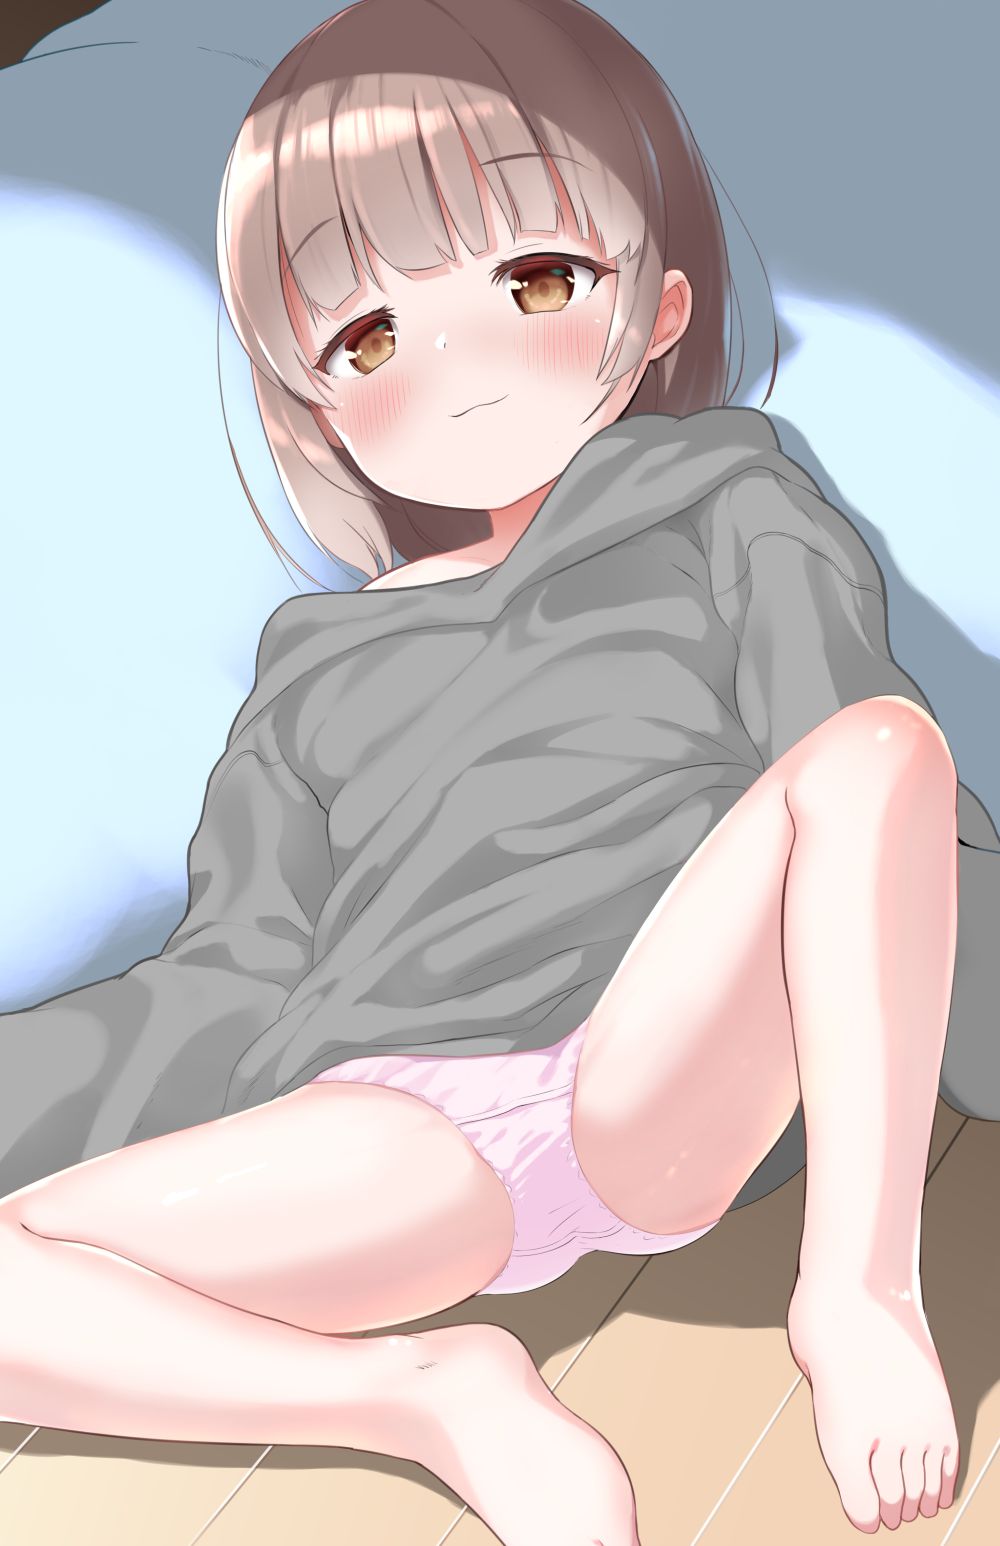 【Excited about Lori pants】 Lori pants secondary erotic image excited by looking at the cute figure of the treasure of the pants of the secondary loli girl 57